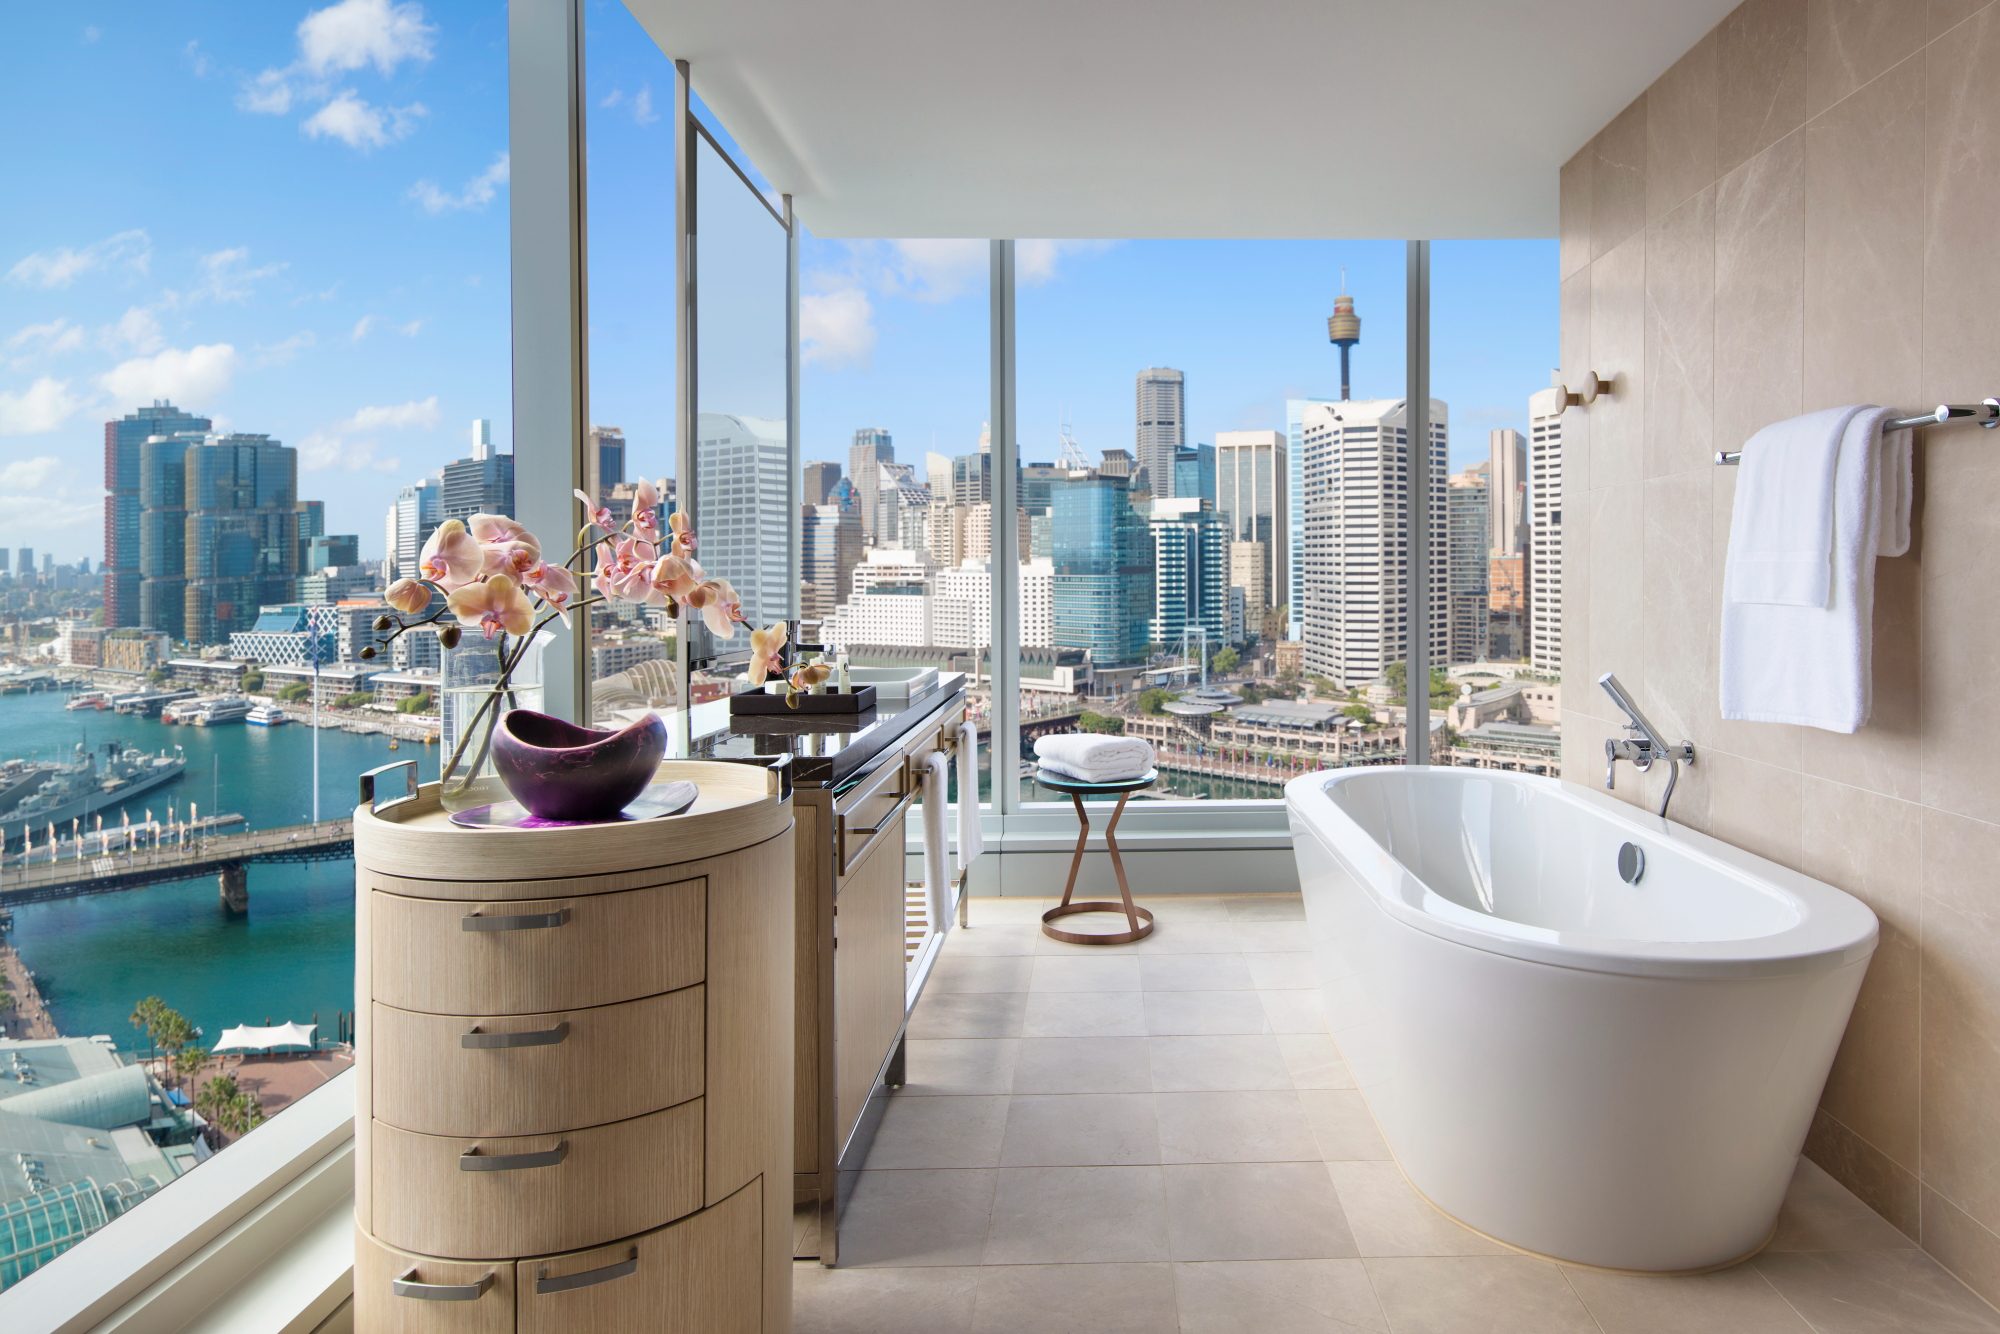 Truly outstanding bathroom at the Sofitel Sydney Darling Harbour. Click to enlarge.